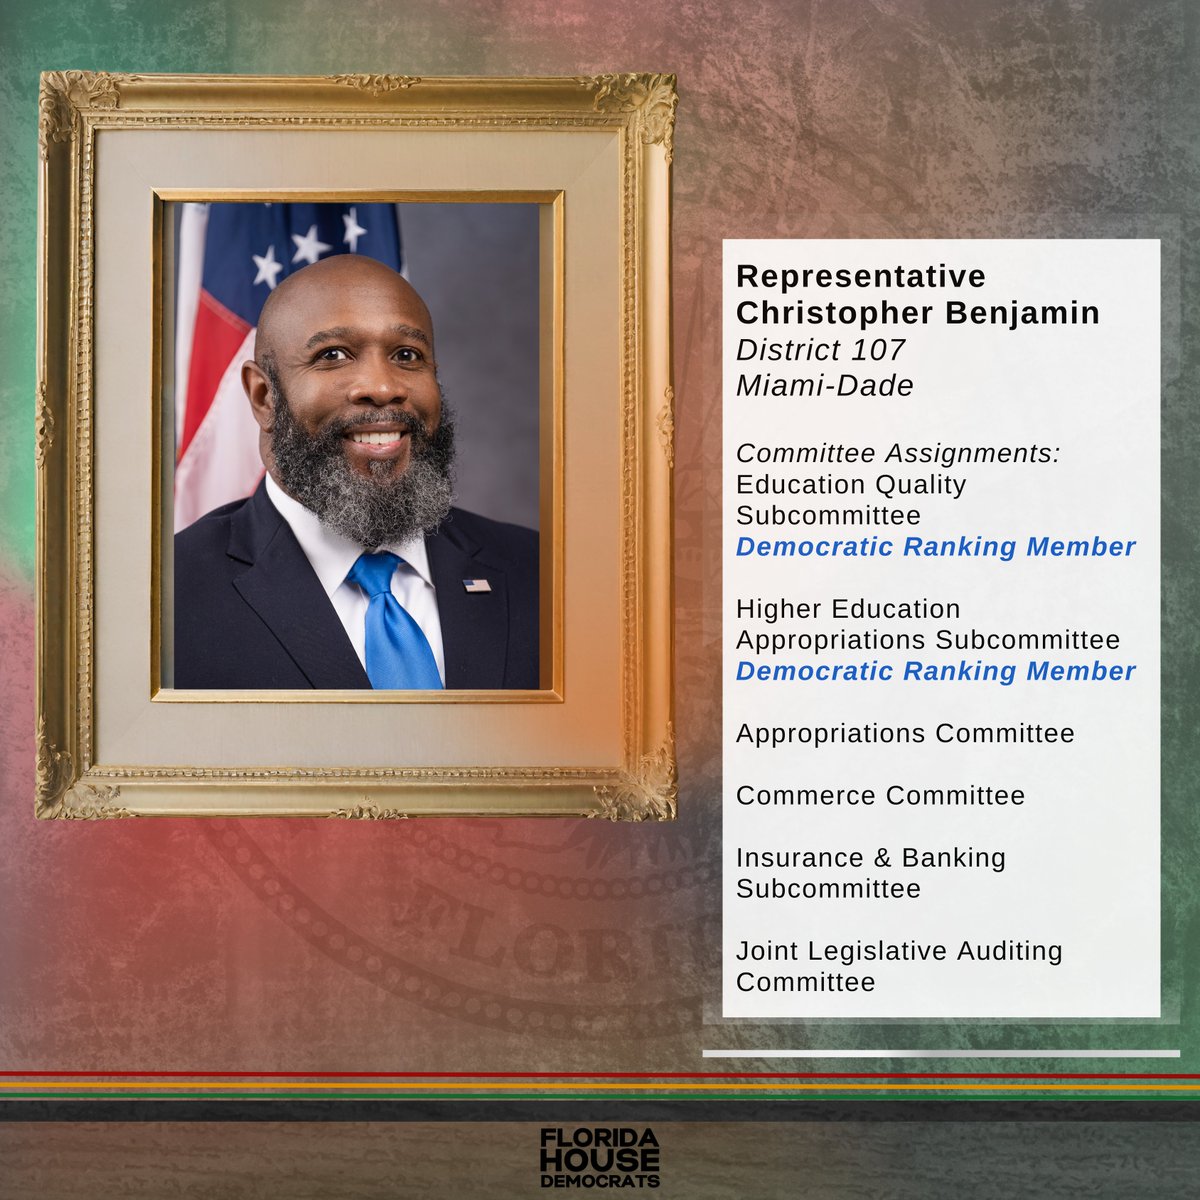 #BlackHistoryIsAmericanHistory Today we recognize @repcbenjamin. Representing part of Miami-Dade County, Rep. Benjamin was first elected to the Florida House in 2020. In his free time, he enjoys gardening, golfing, and watching movies.